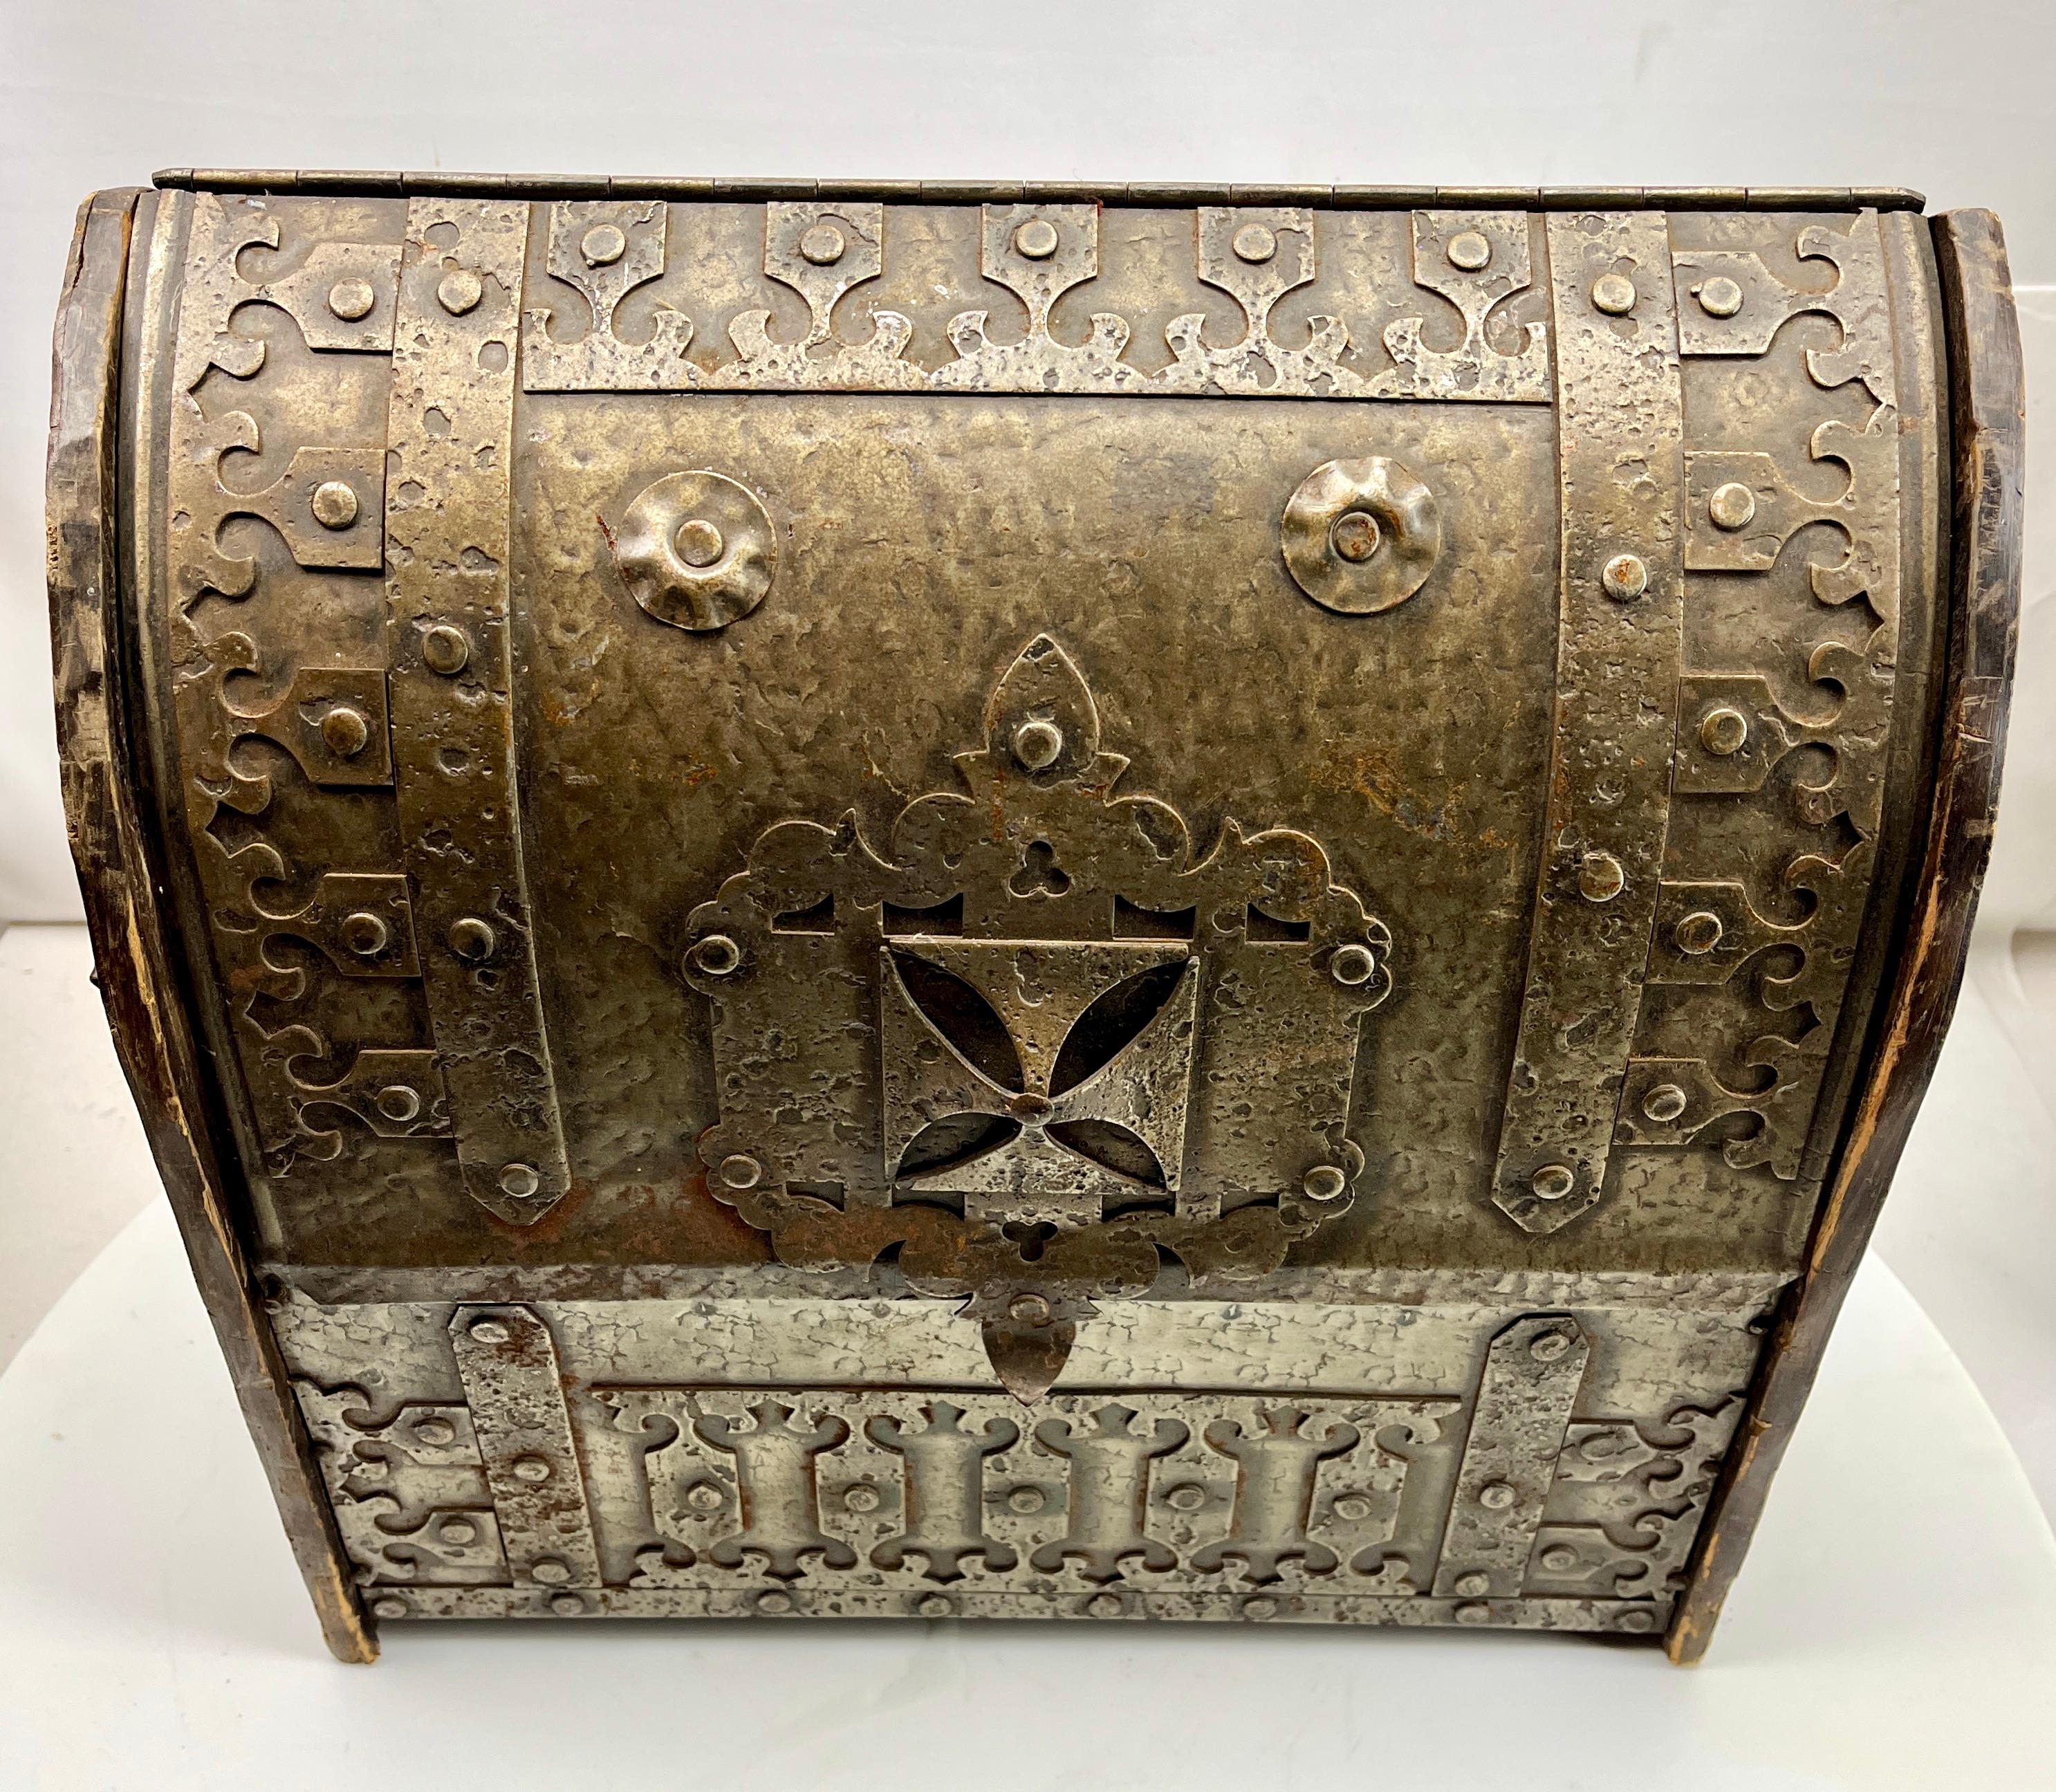 Arts & Crafts Wine Cave with Decorative Metal Work, circa 1920s

Box from the Arts & Crafts period,
Made in France
A very special item with decorative metal work on top. Definitely one of a kind.
Looks simply stunning.
We prefer to sell our items in